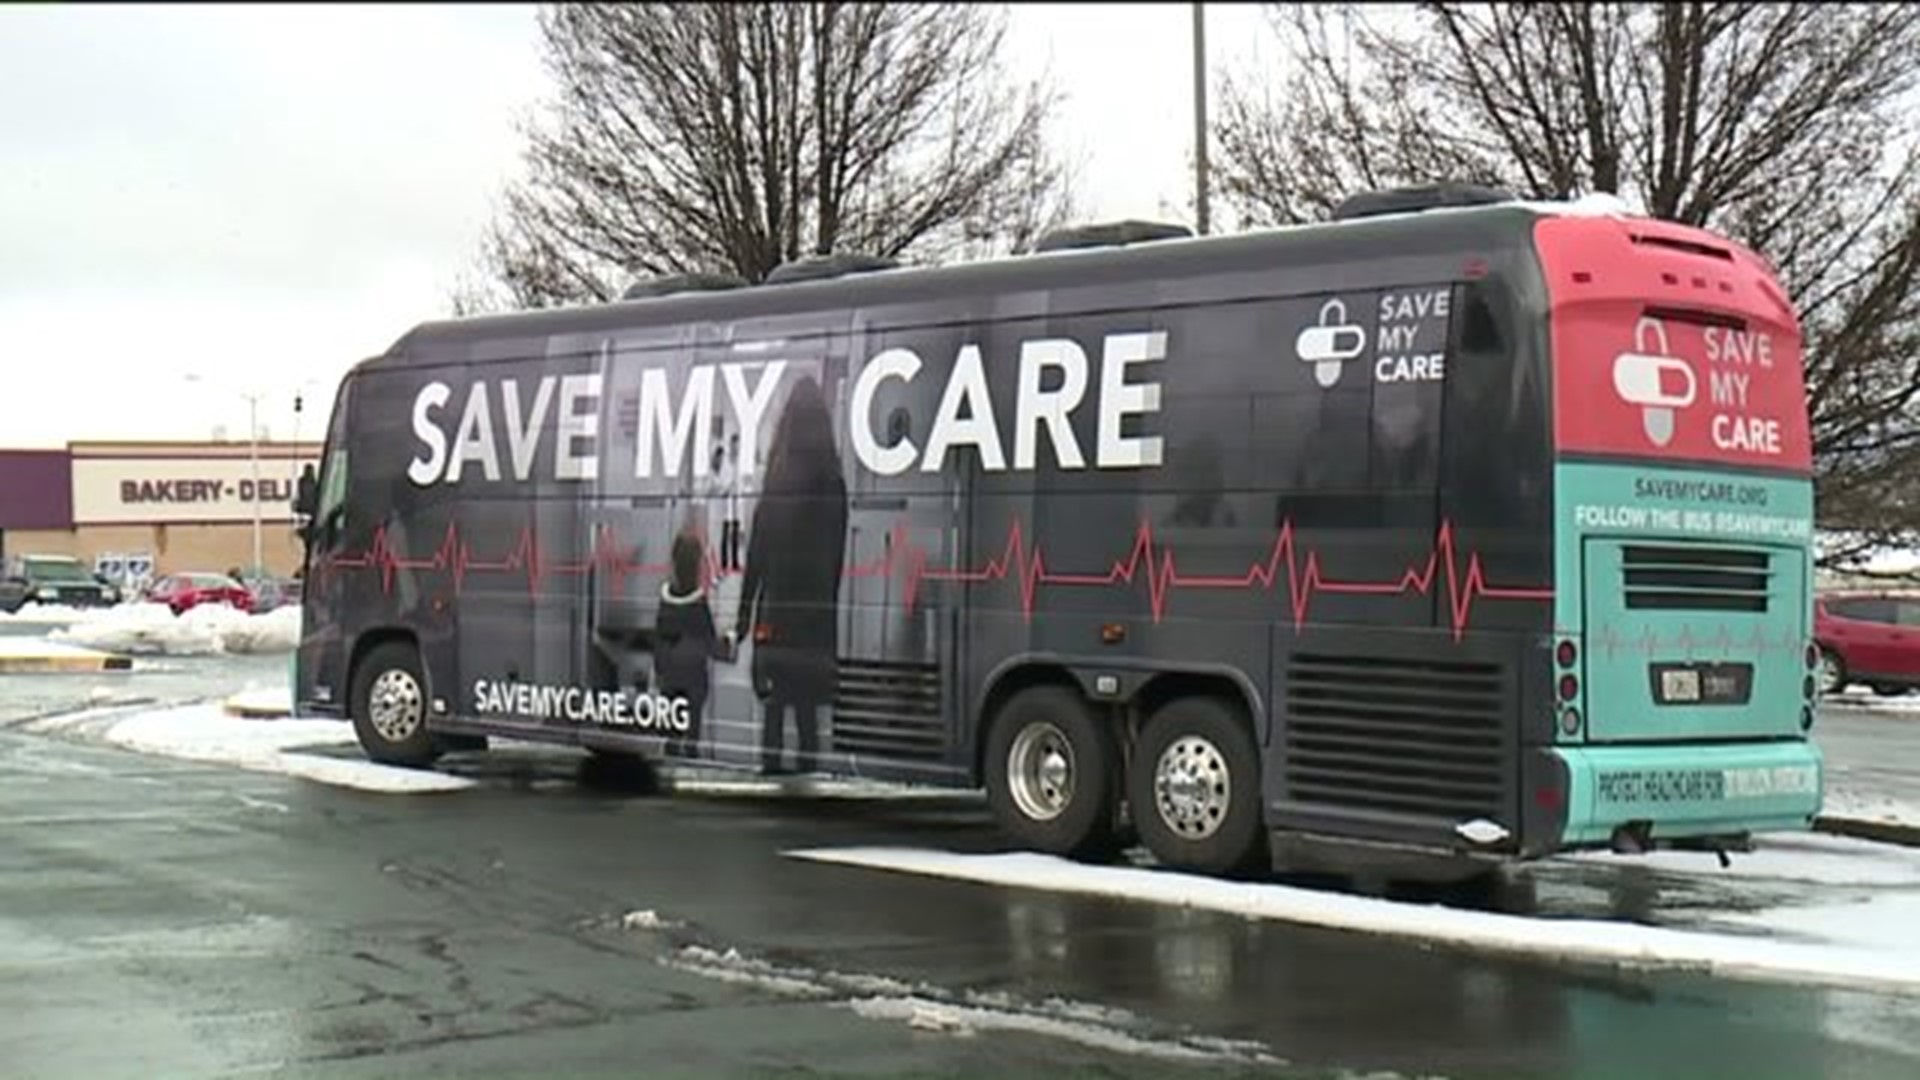 Bus Tour to Save Obamacare Stops in Scranton